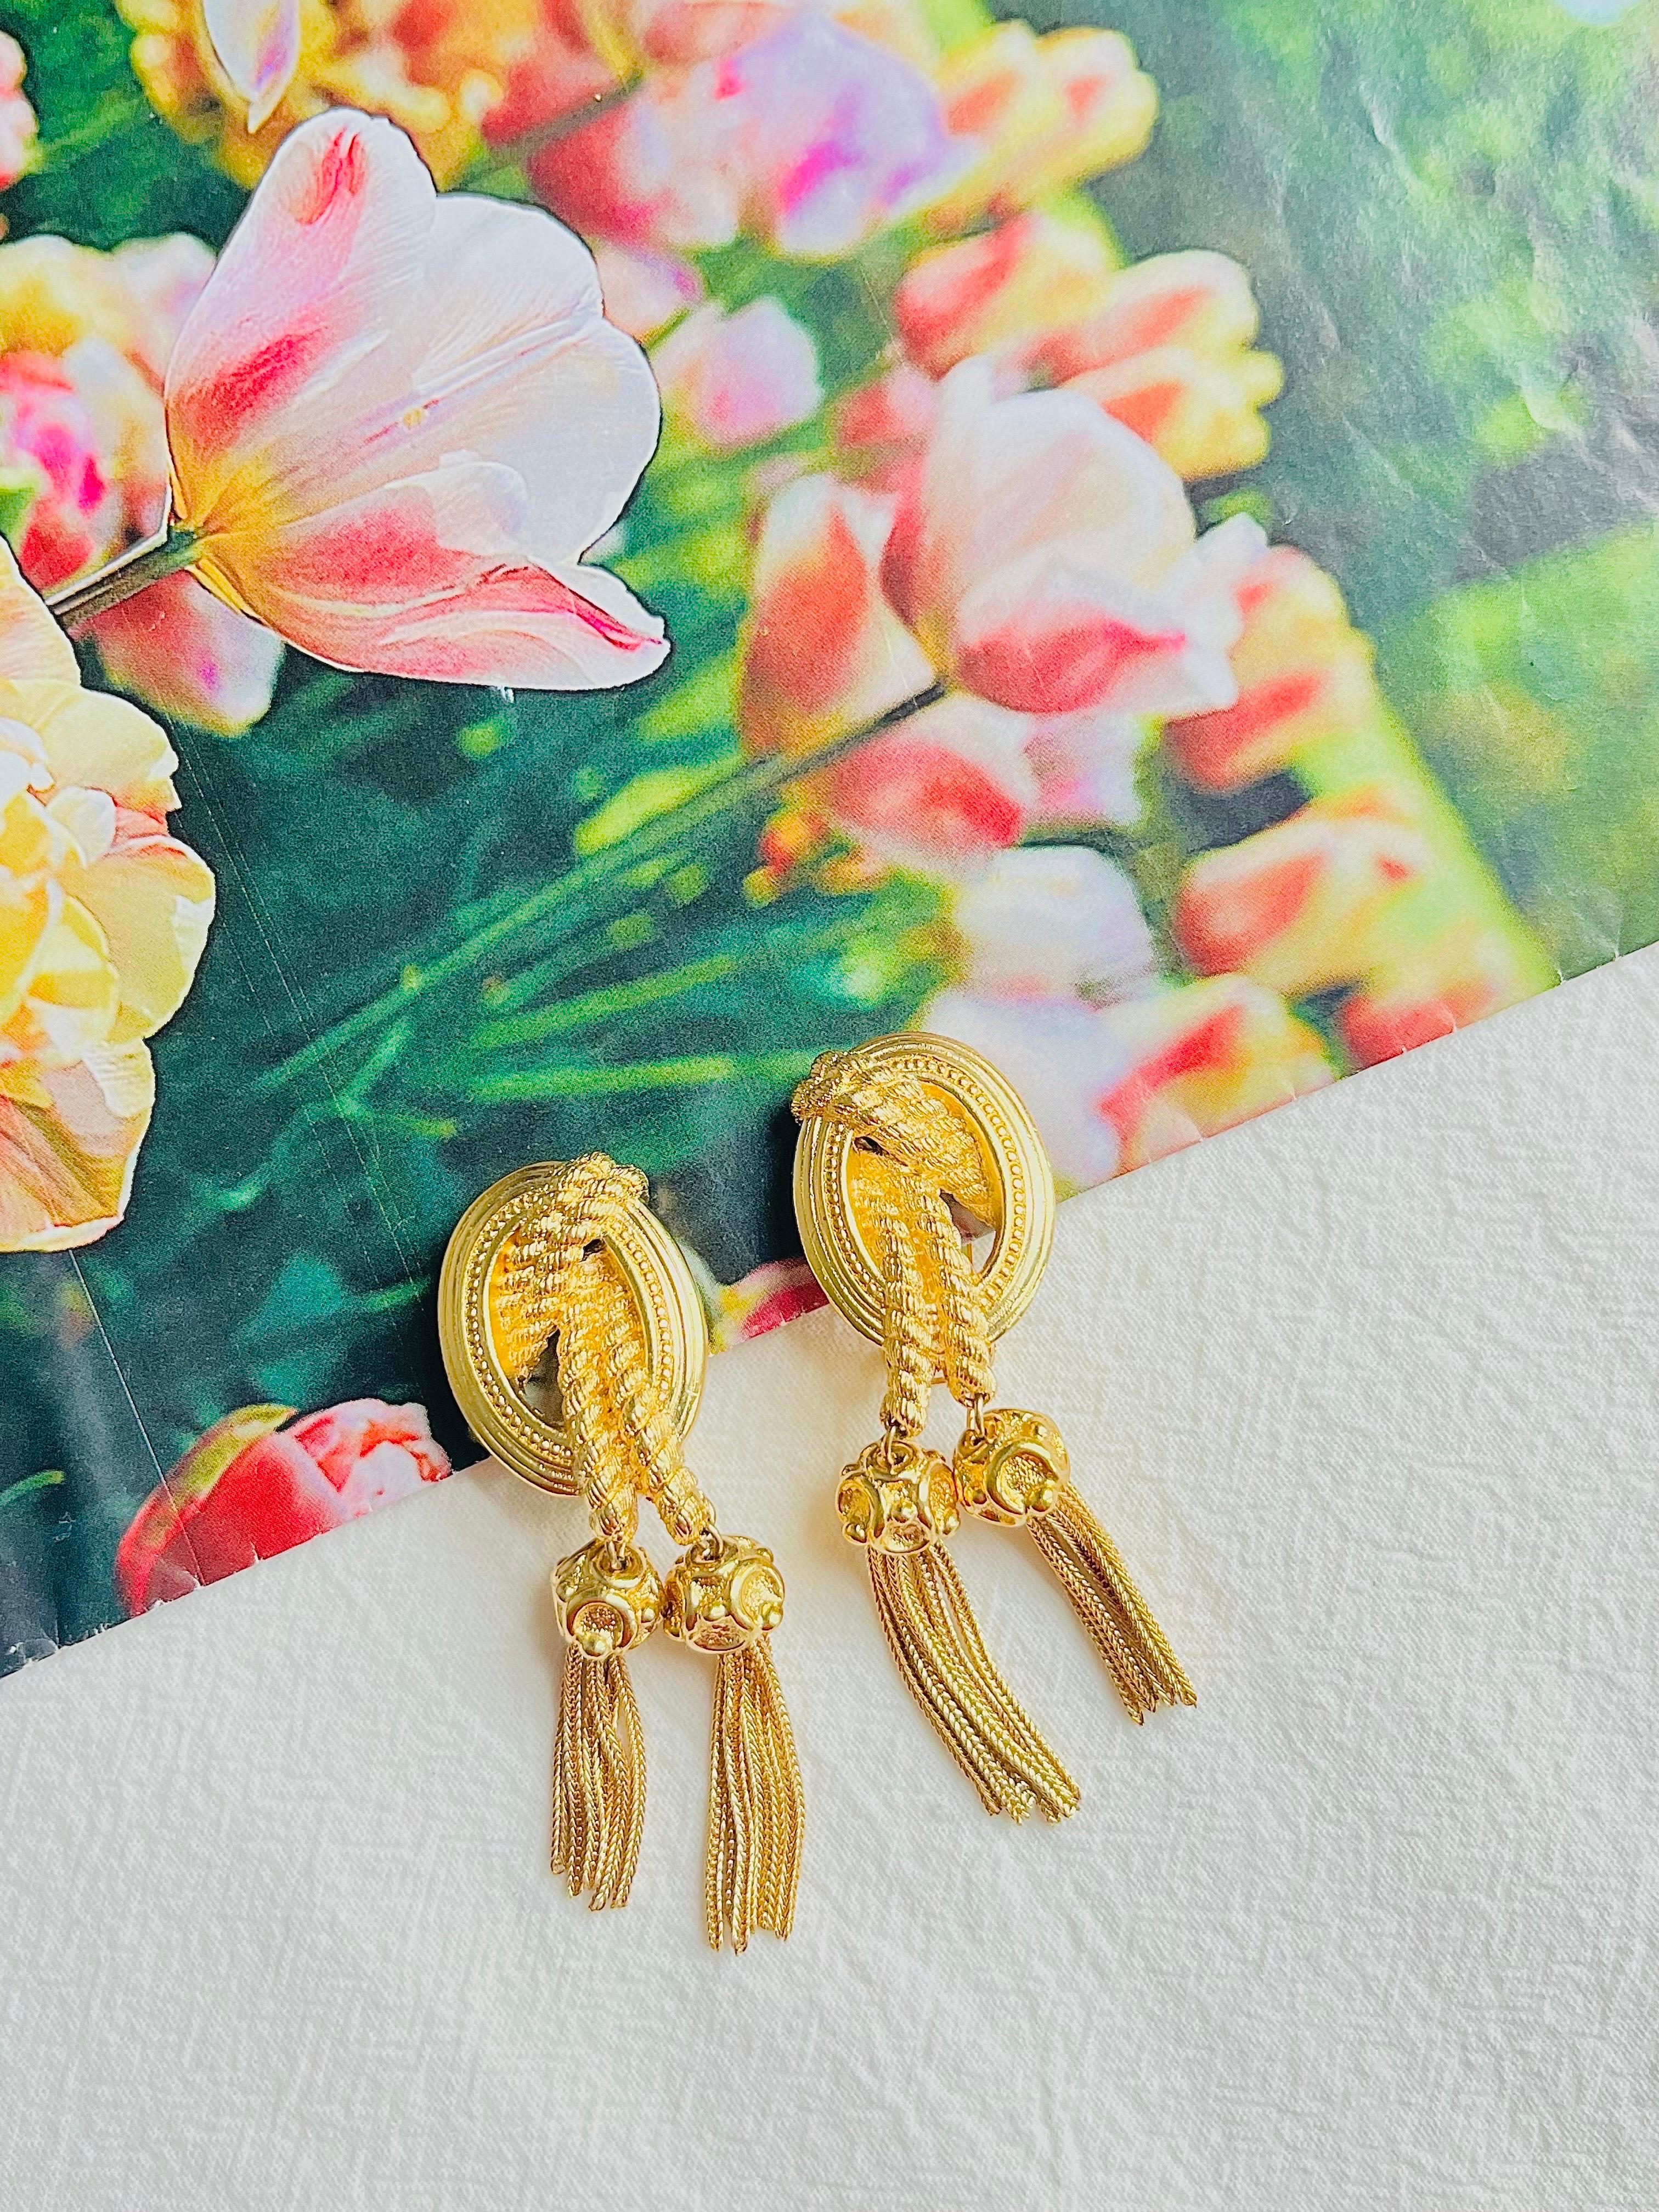 Christian Dior 1980s Vintage Medallion Double Tassel Rope Openwork Chunky Modernist Drop Clip Earrings, Gold Plated

Very excellent condition. Marked 'Chr.Dior (C) '. Rare to find. 100% Genuine.

It is around 50 years old. This is a very stylish and